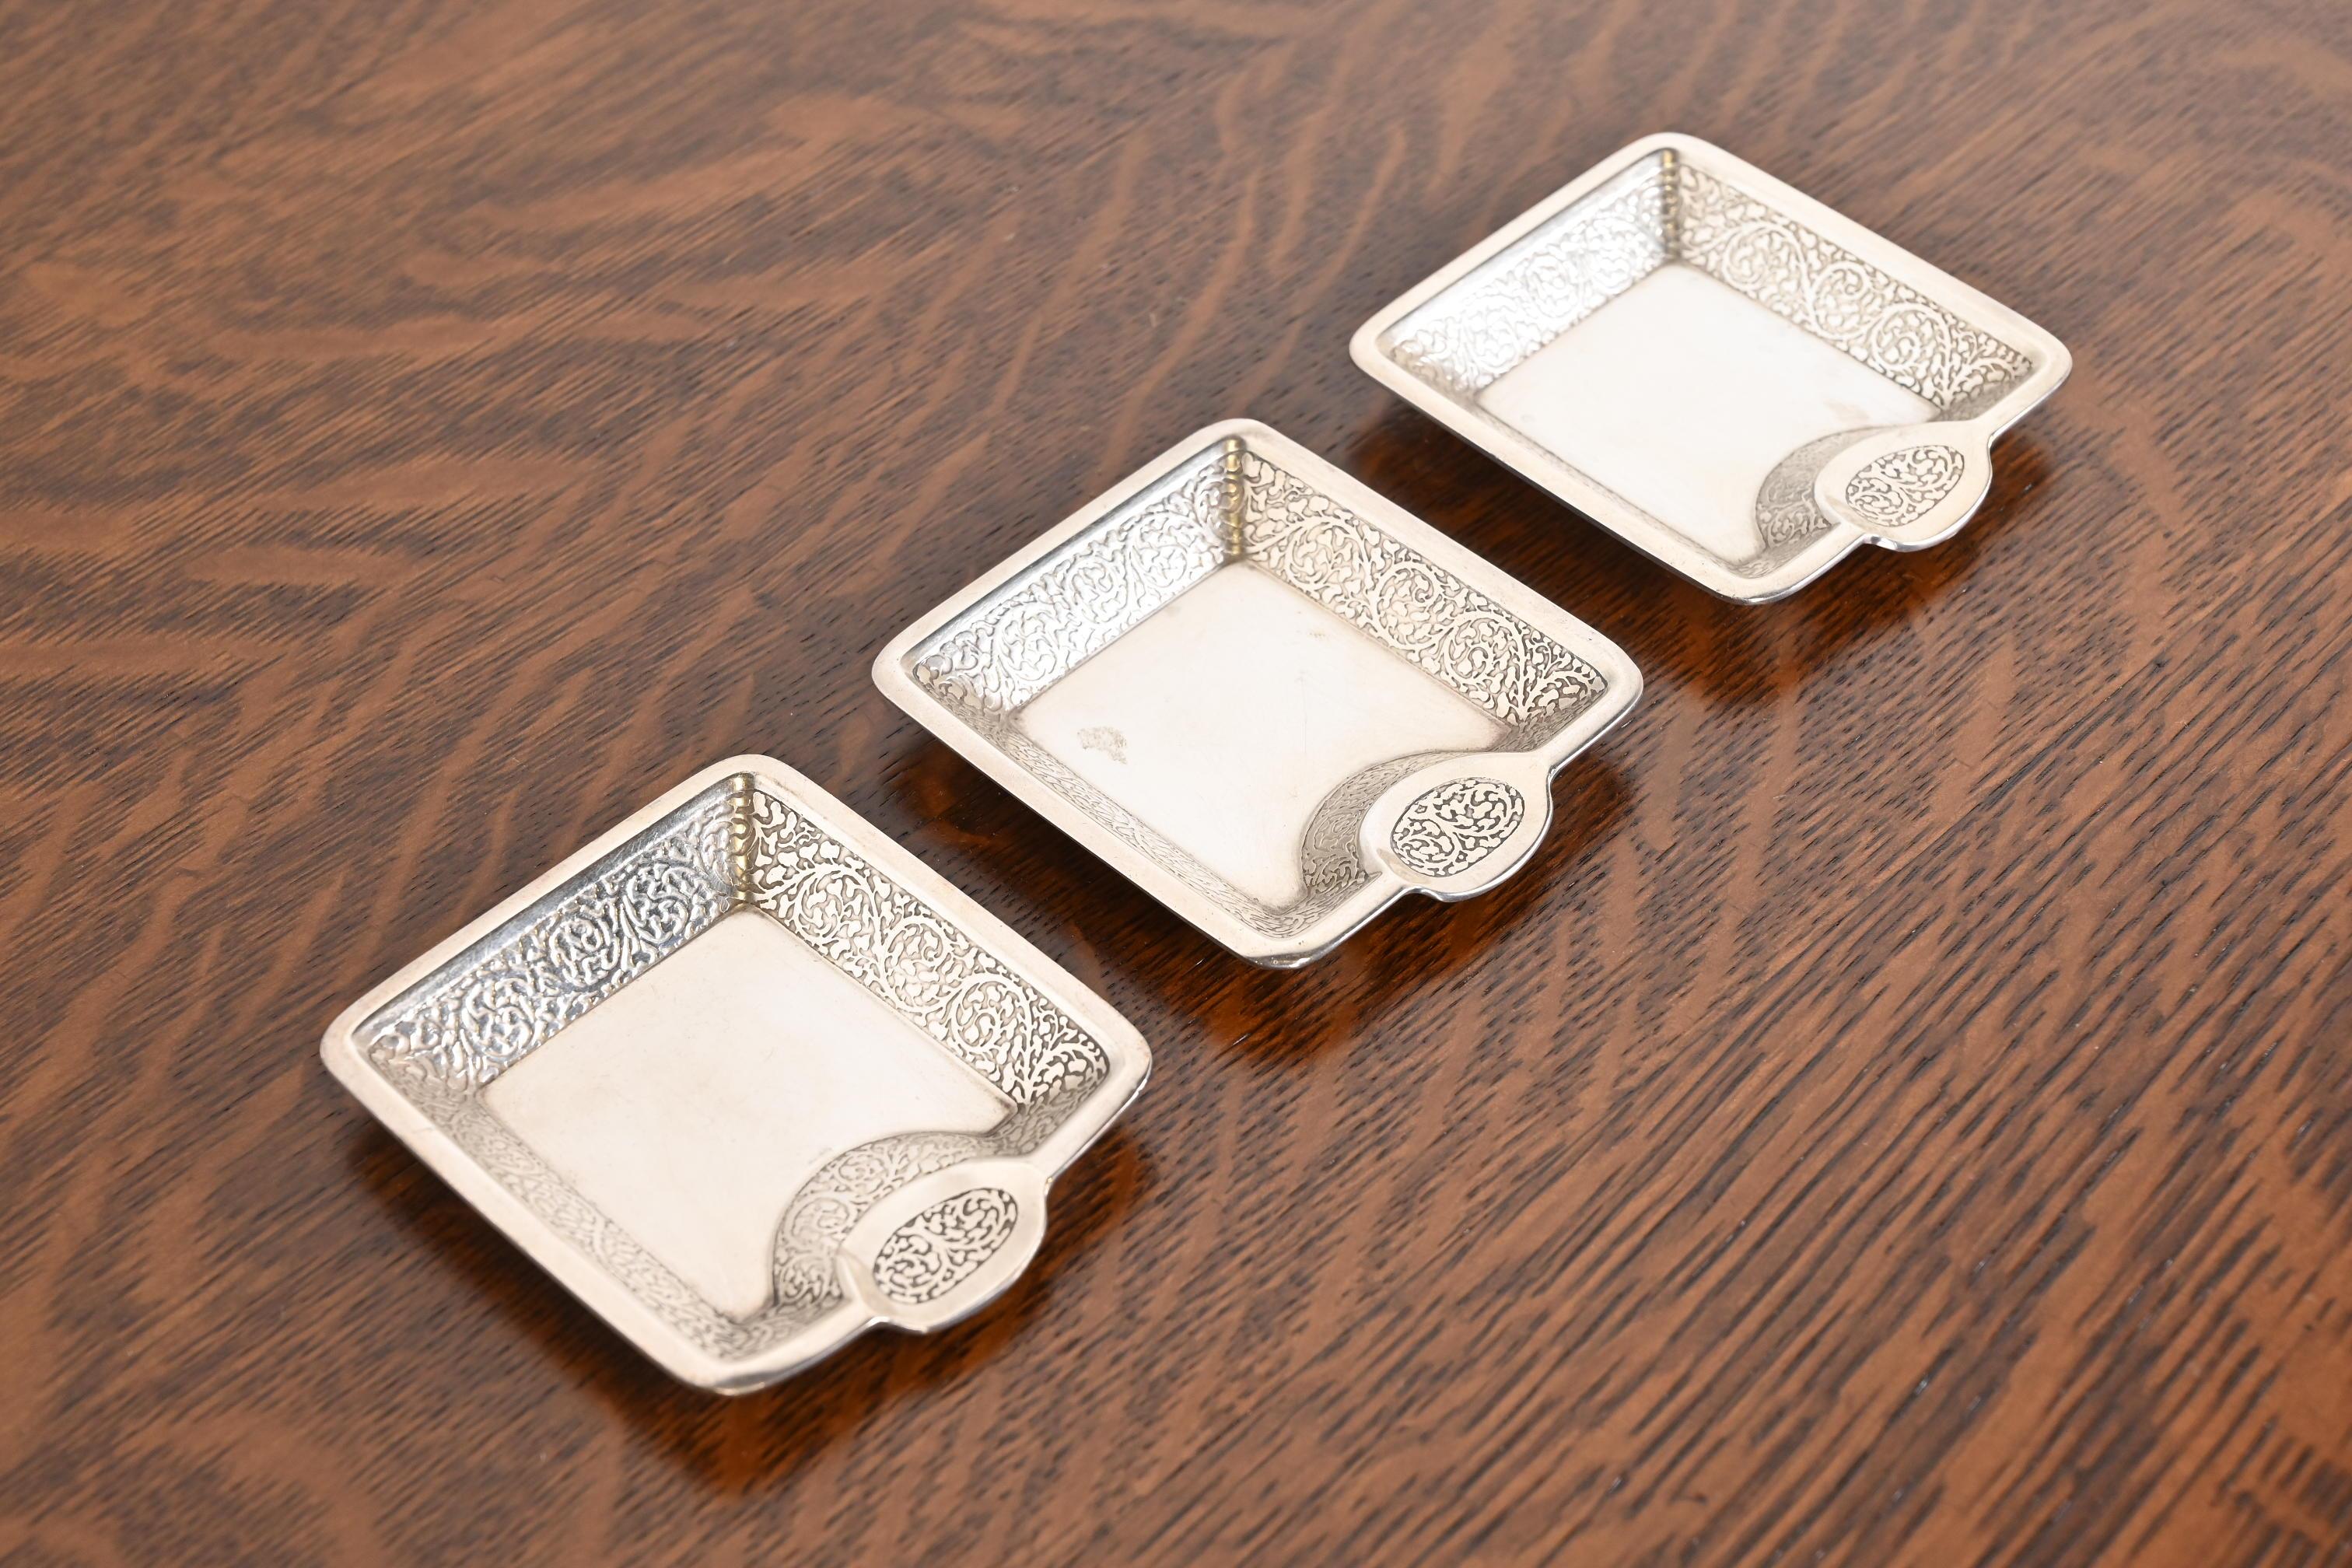 Tiffany & Co. Art Deco Sterling Silver Ashtrays or Catchall Trays, Set of Three 1